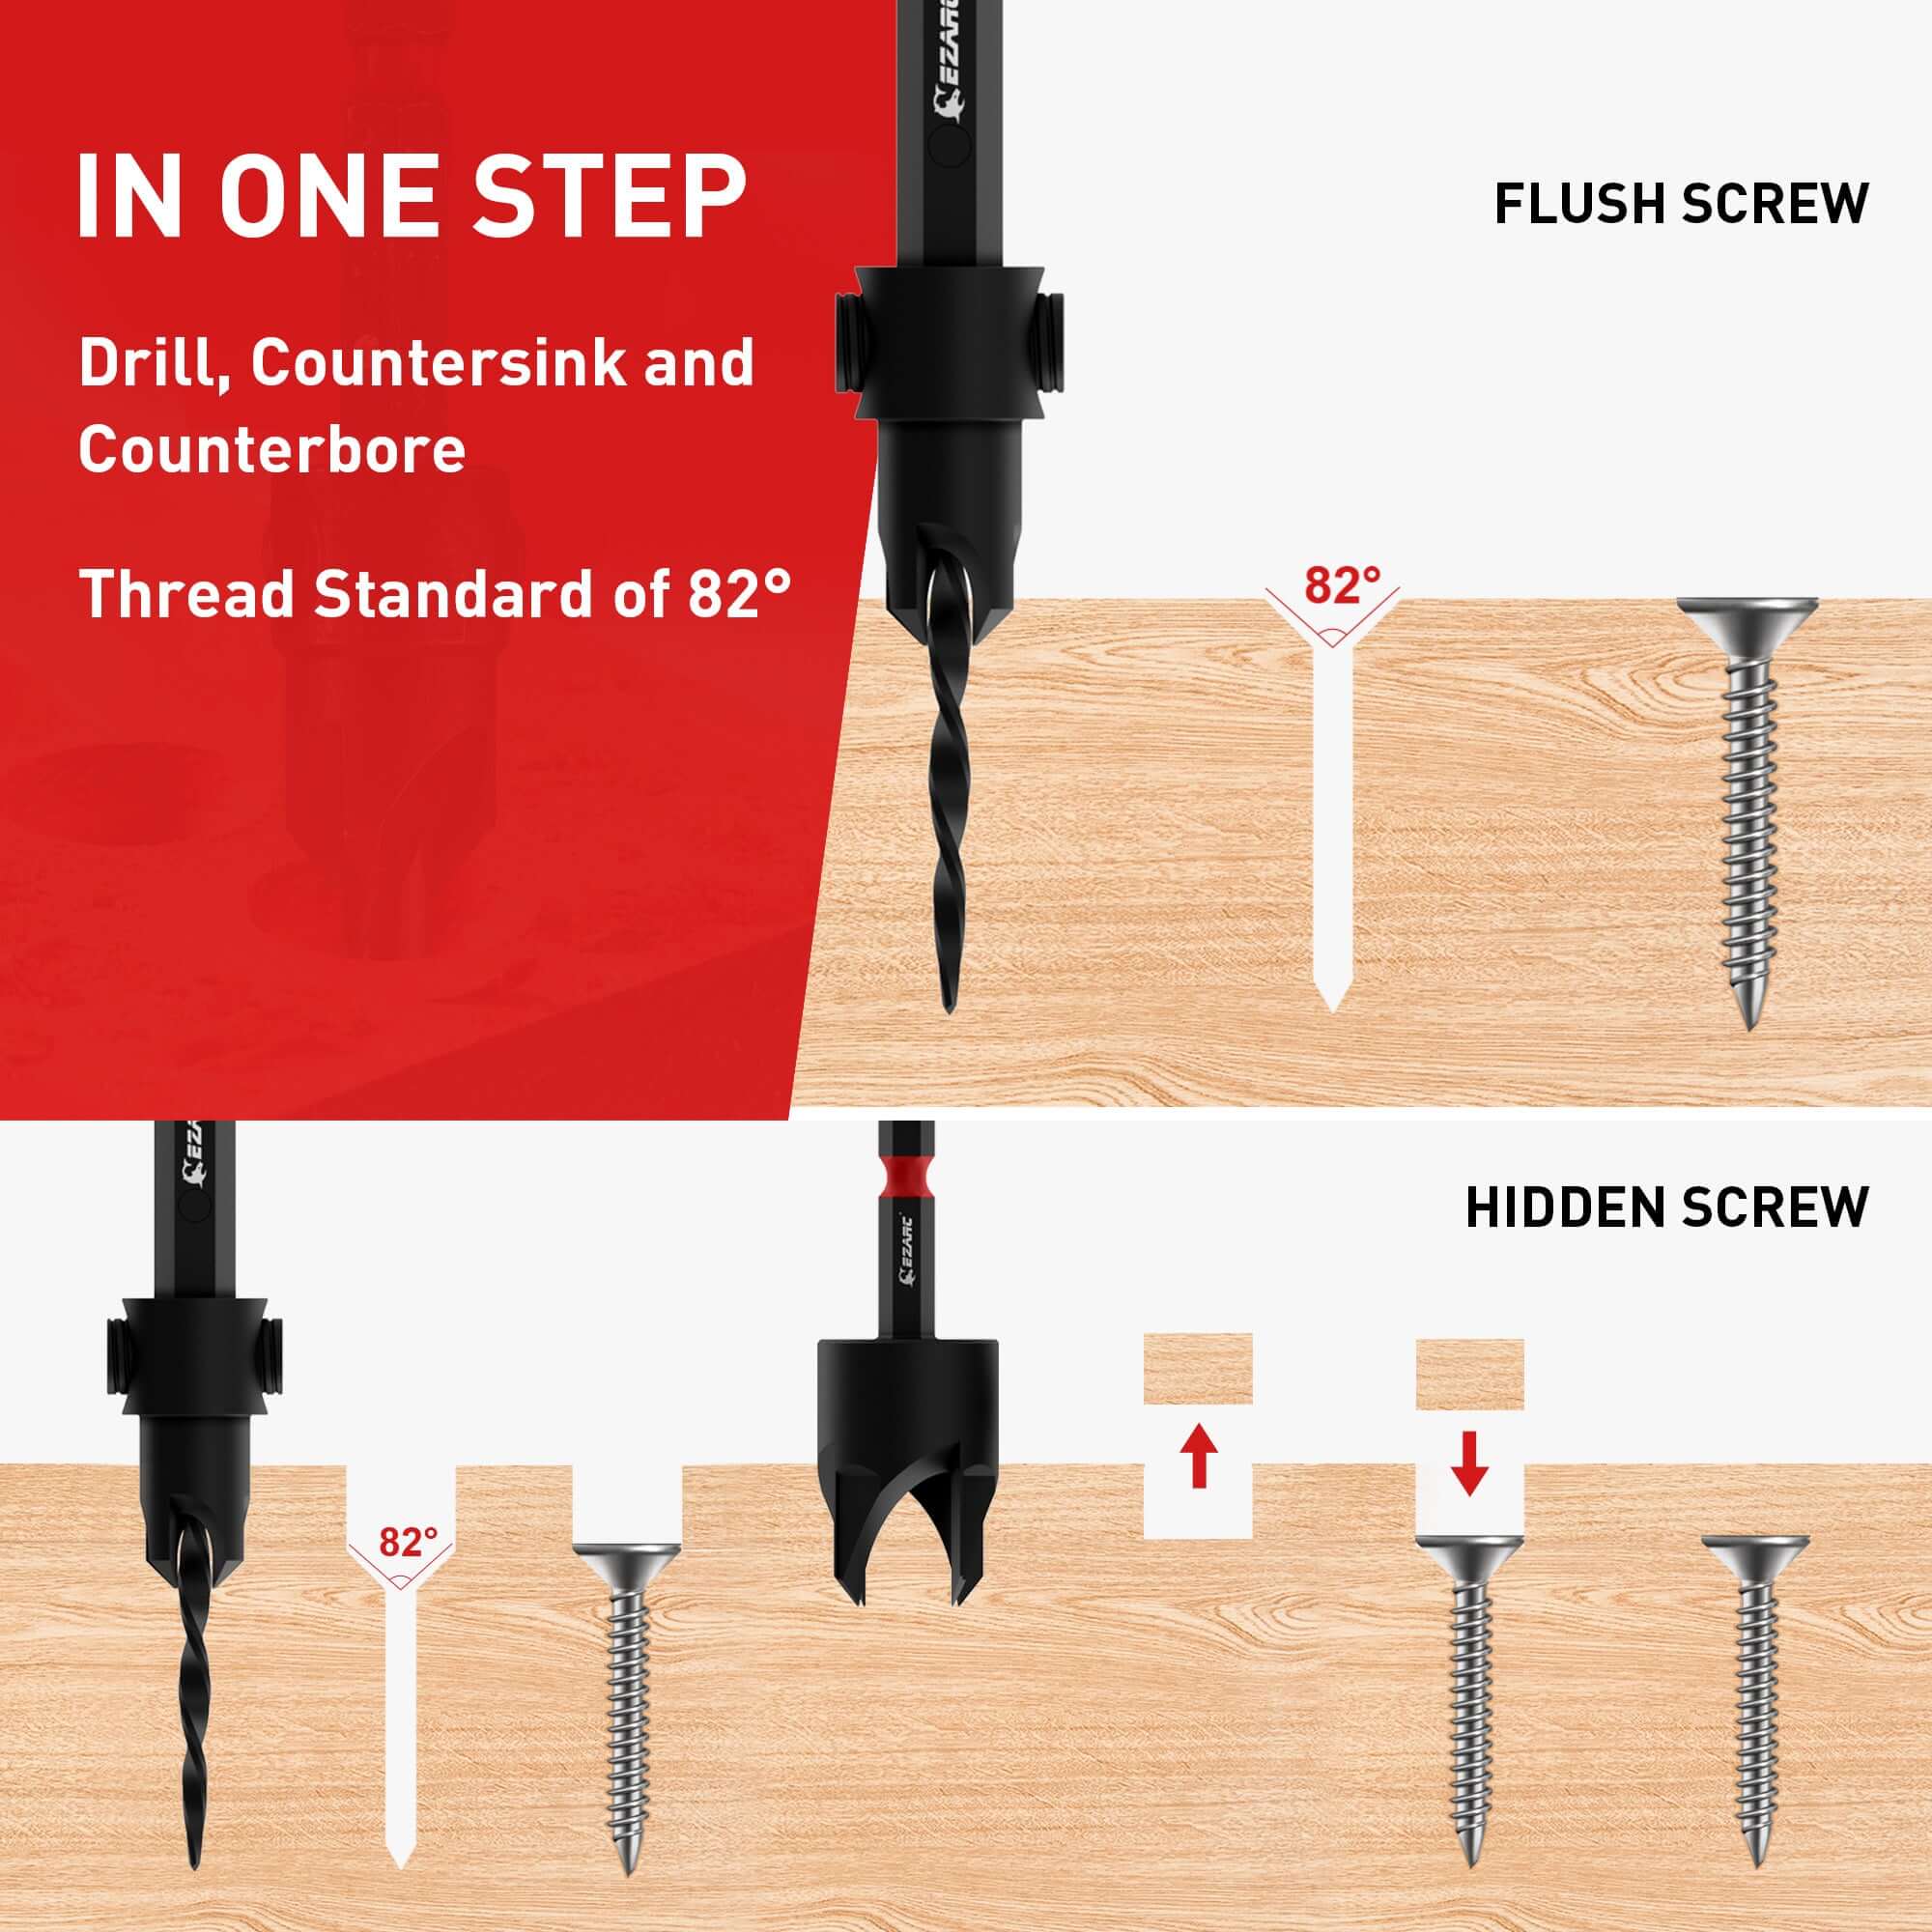 Wood Countersink Drill Bit Set With 1/4" Hex Shank0